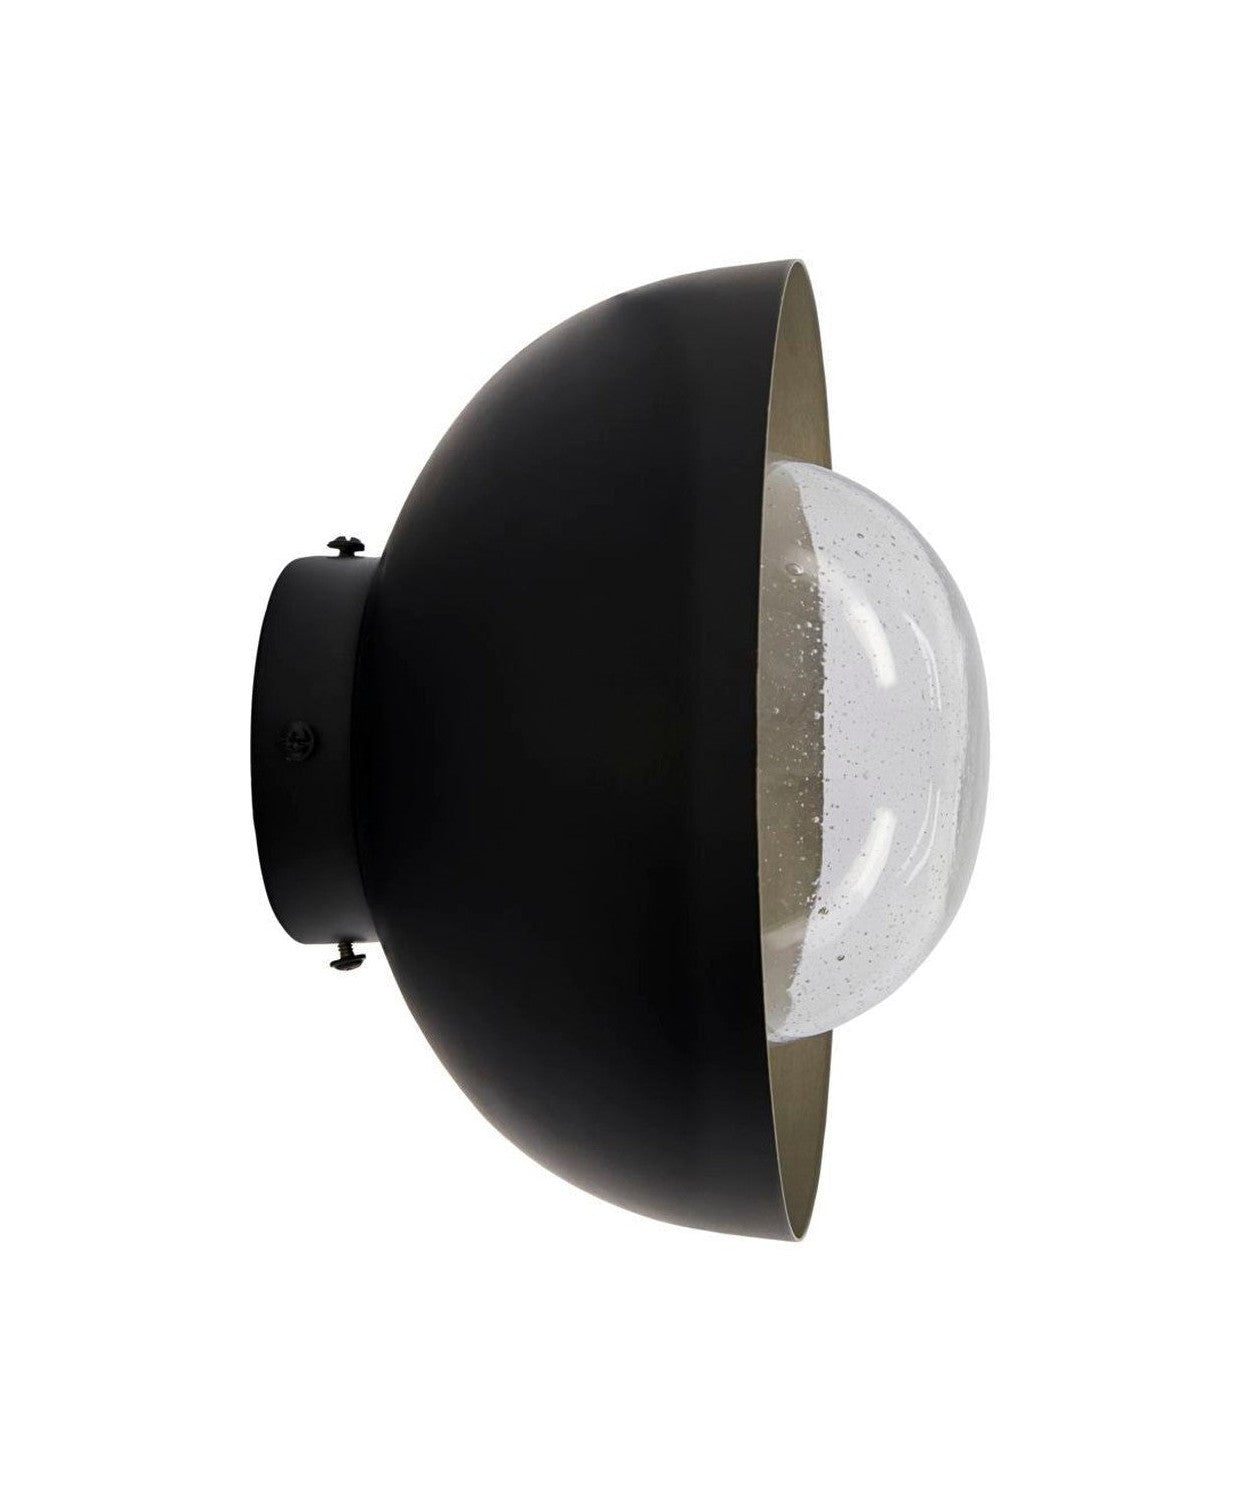 Af Nord Wall Lamp, Bnmidtre, kul